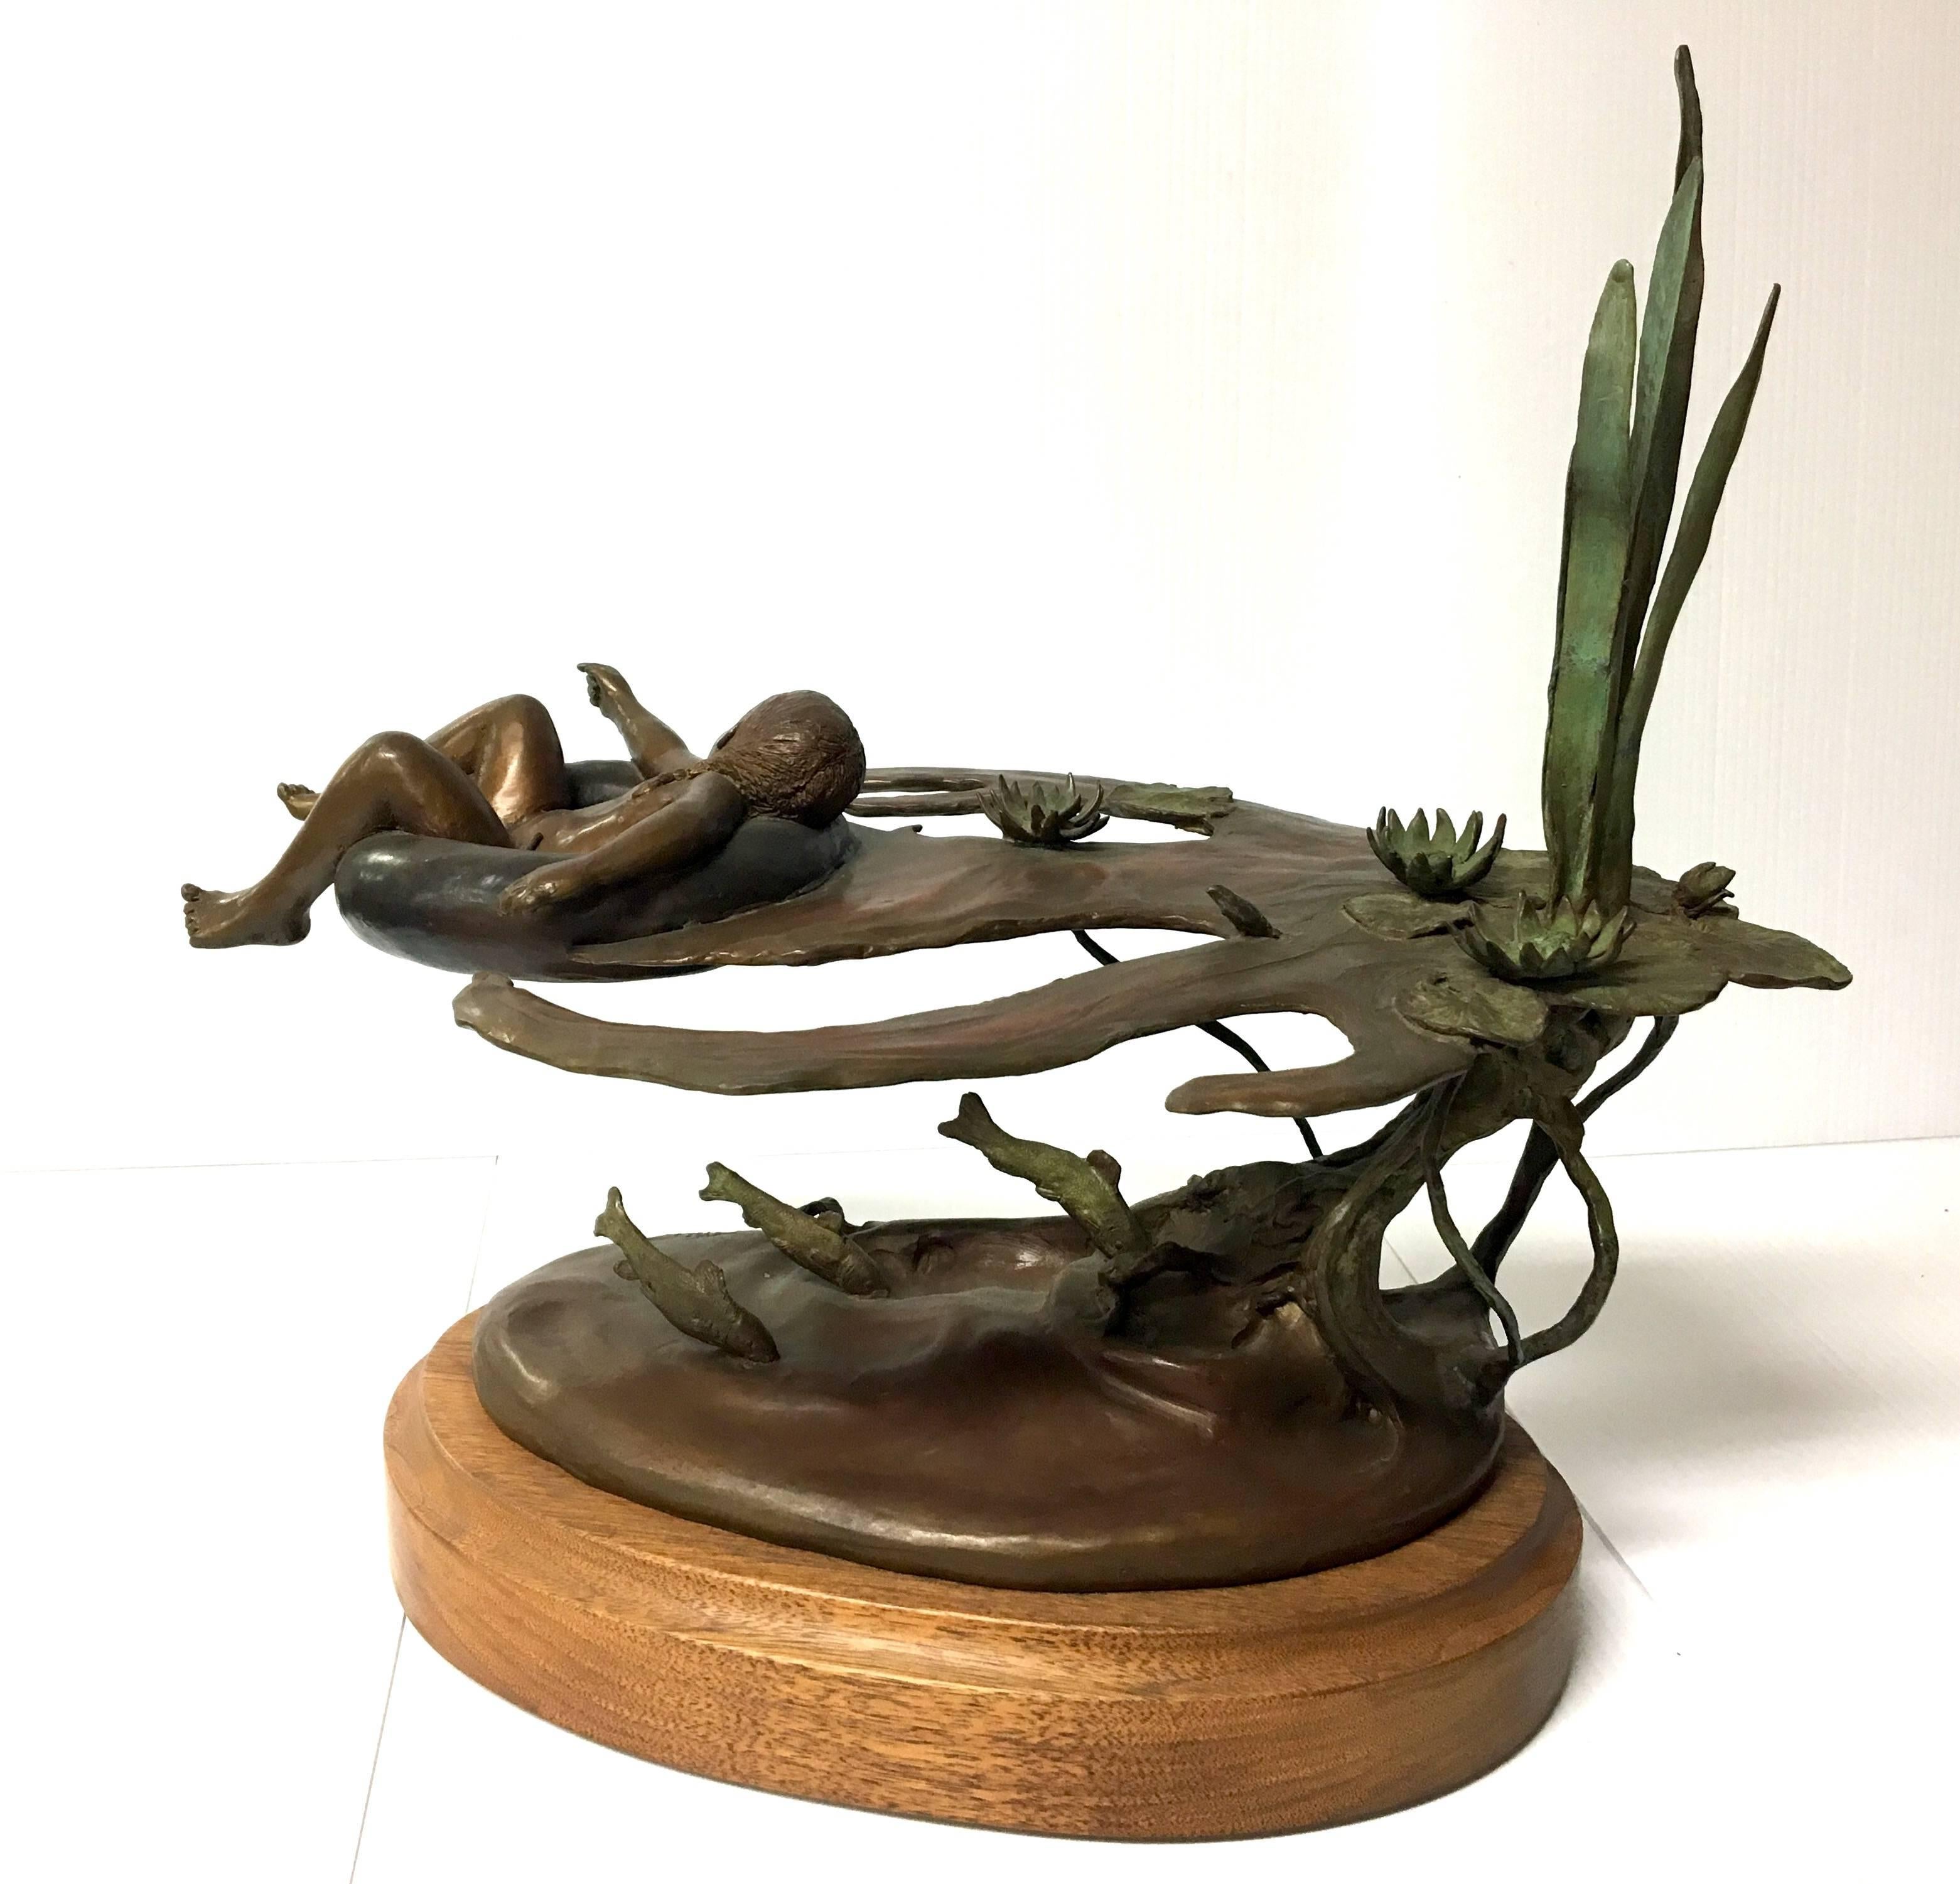 Beautiful sculpture of a little girl on an inner tube floating on the river by listed Sedona artist Joyce Killebrew, circa 1980s. This exquisite piece, entitled "Katy" mounted in a rotatory oak base, signed and numbered 4/20.